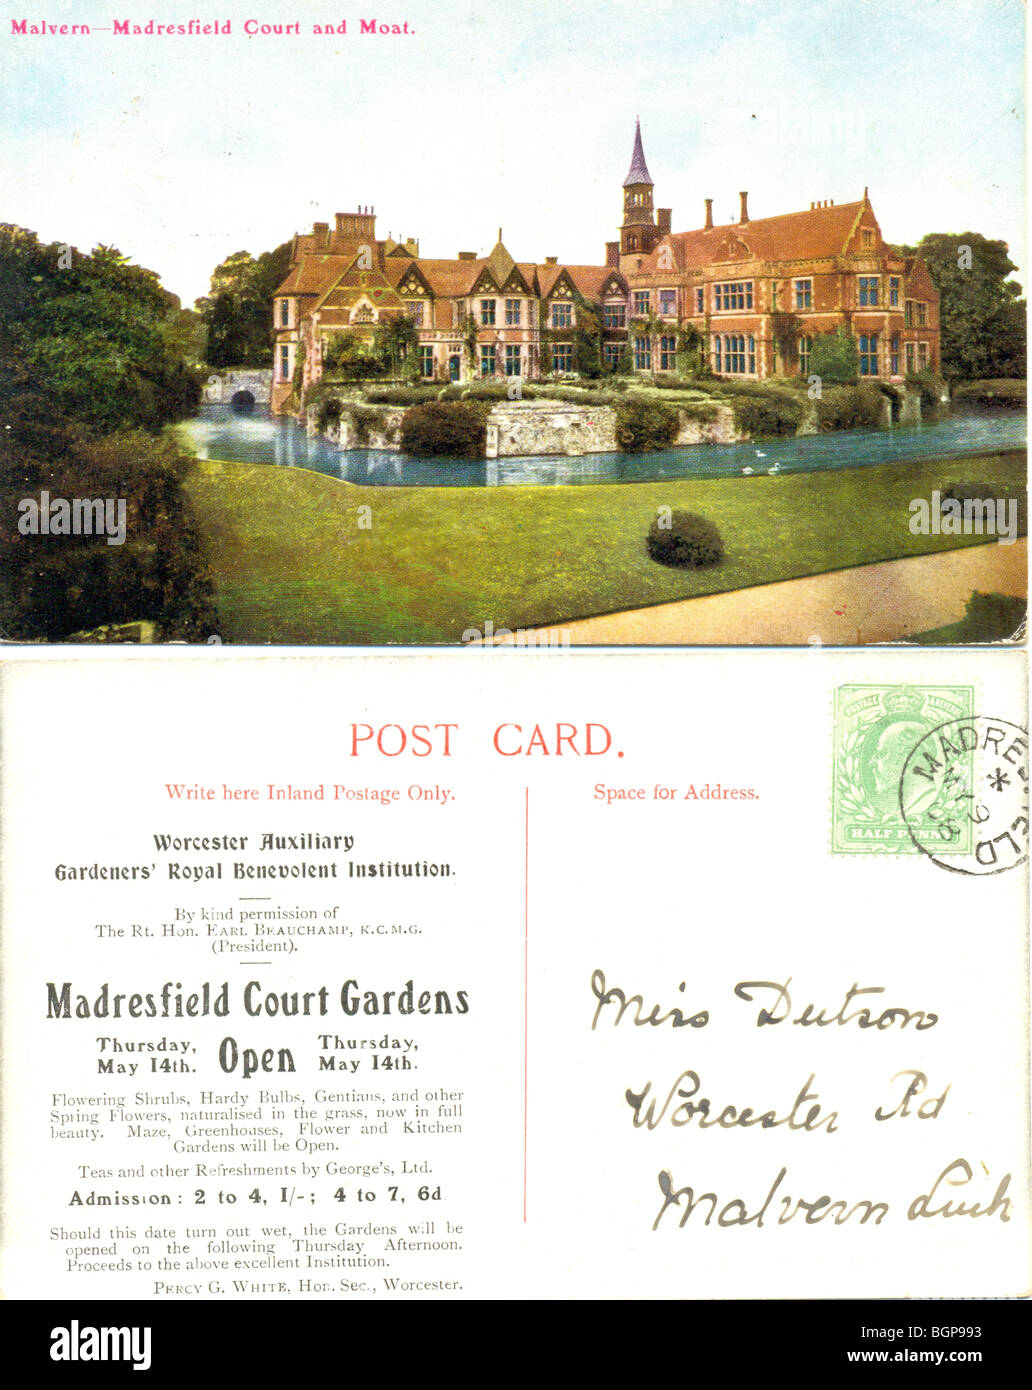 Picture postcard of Madresfield Court and Moat, Malvern. Stock Photo